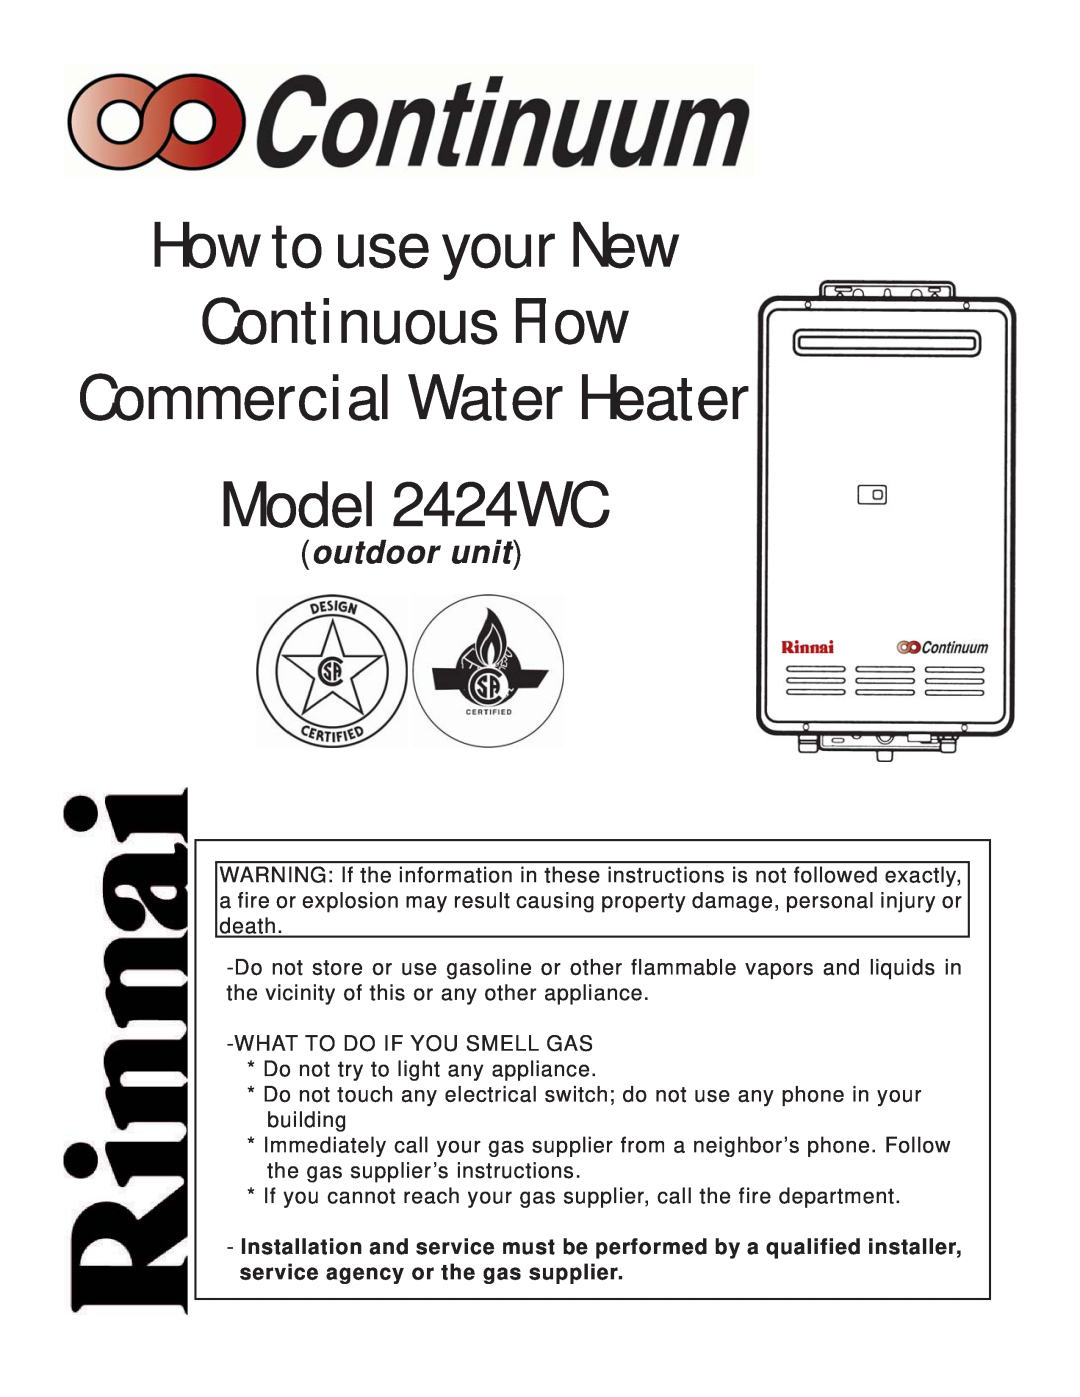 Rinnai manual How to use your New Continuous Flow, Commercial Water Heater Model 2424WC, outdoor unit 